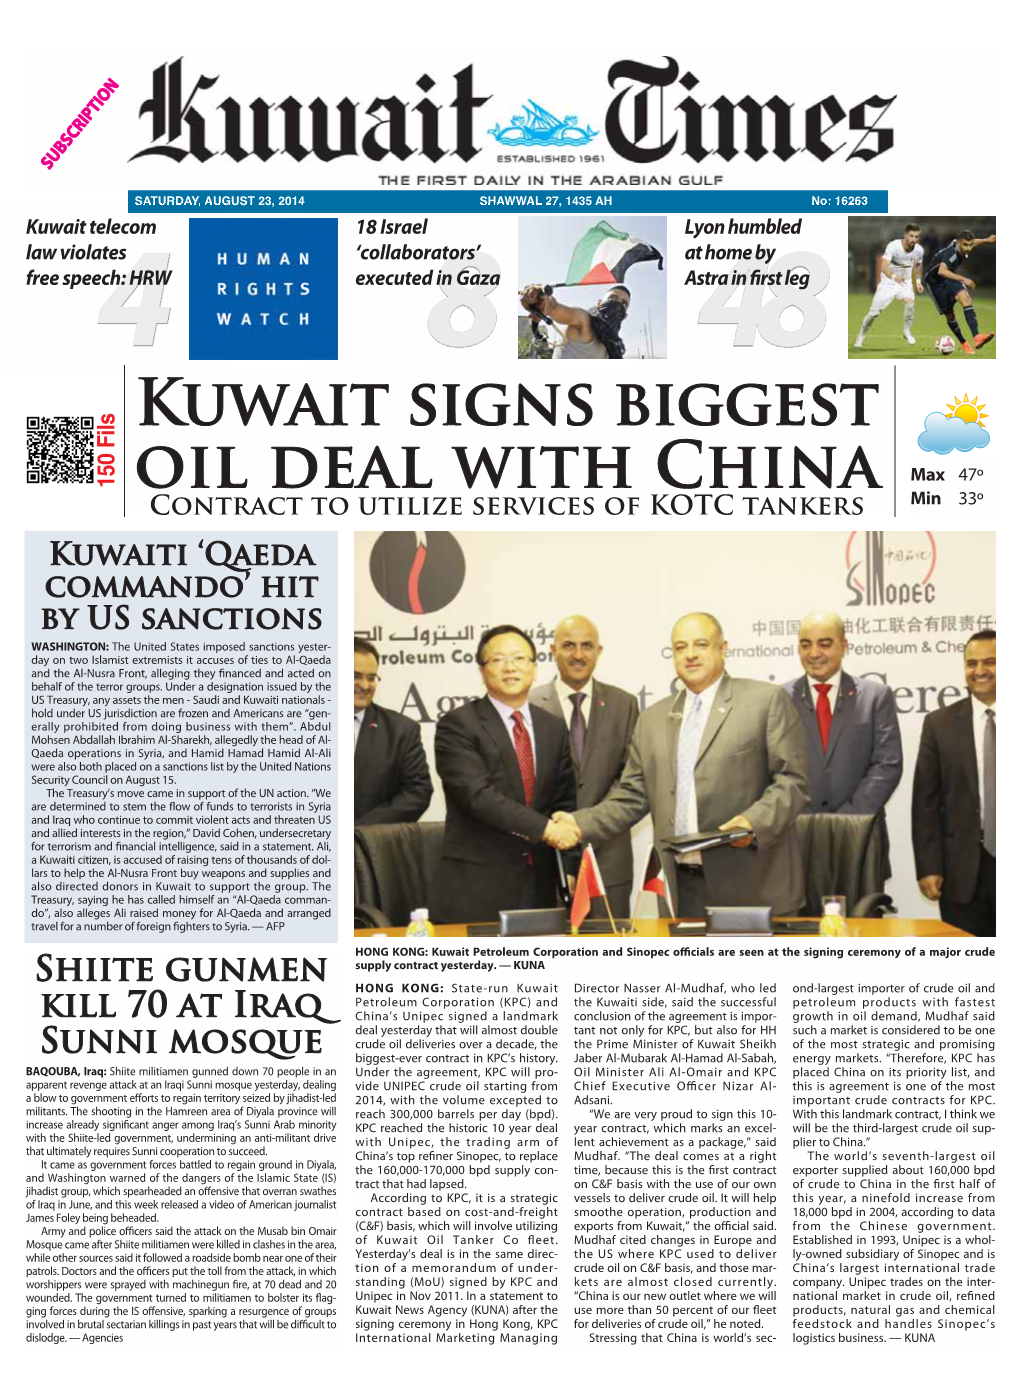 Kuwait Signs Biggest Oil Deal with China